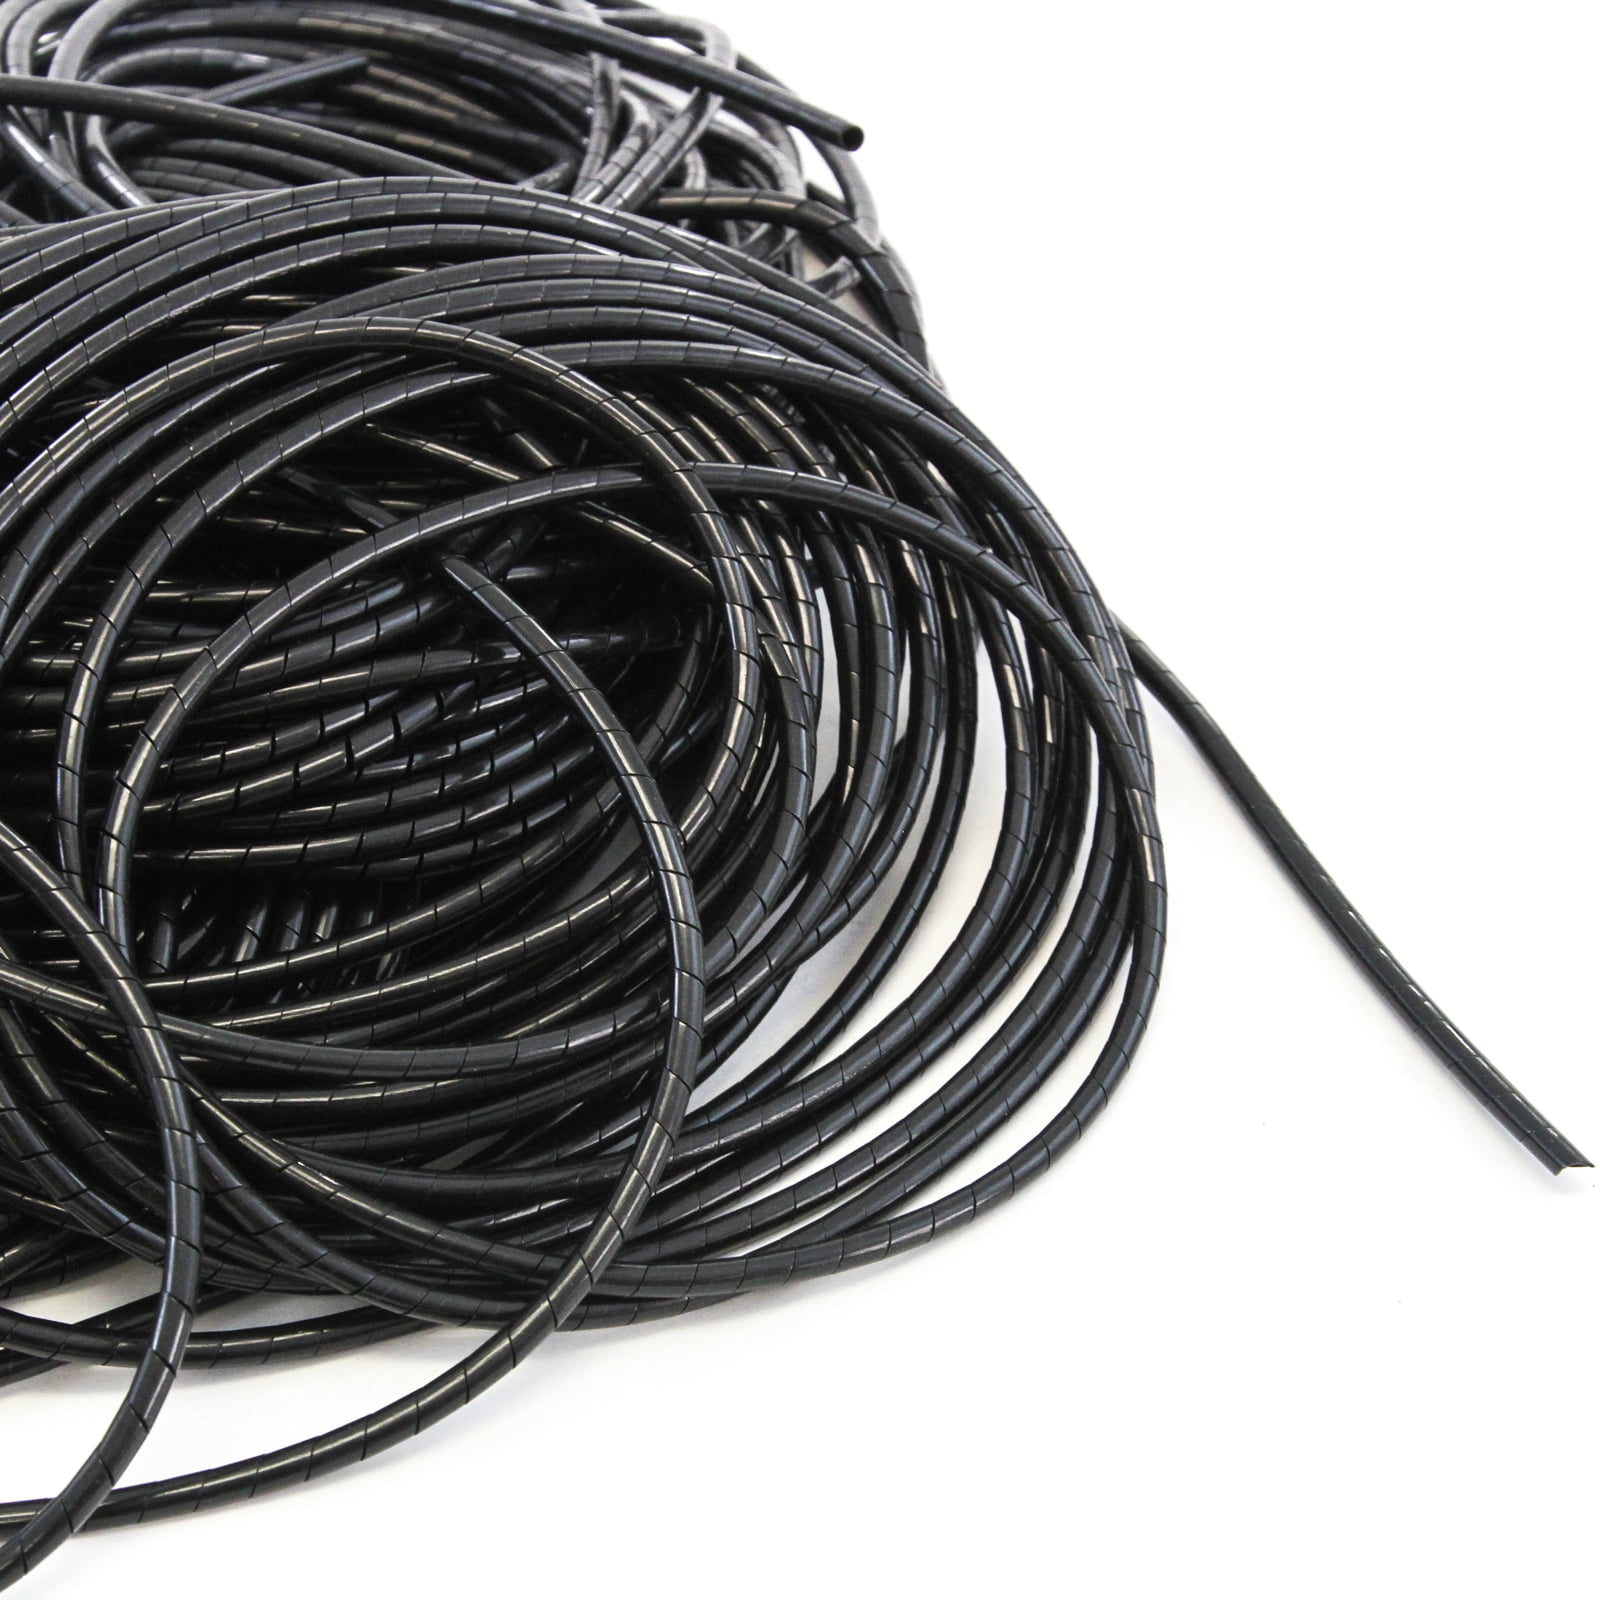 333FT PE 1/4" 6 mm Black Polyethylene Spiral Wire Wrap PC for Car Computer Cable